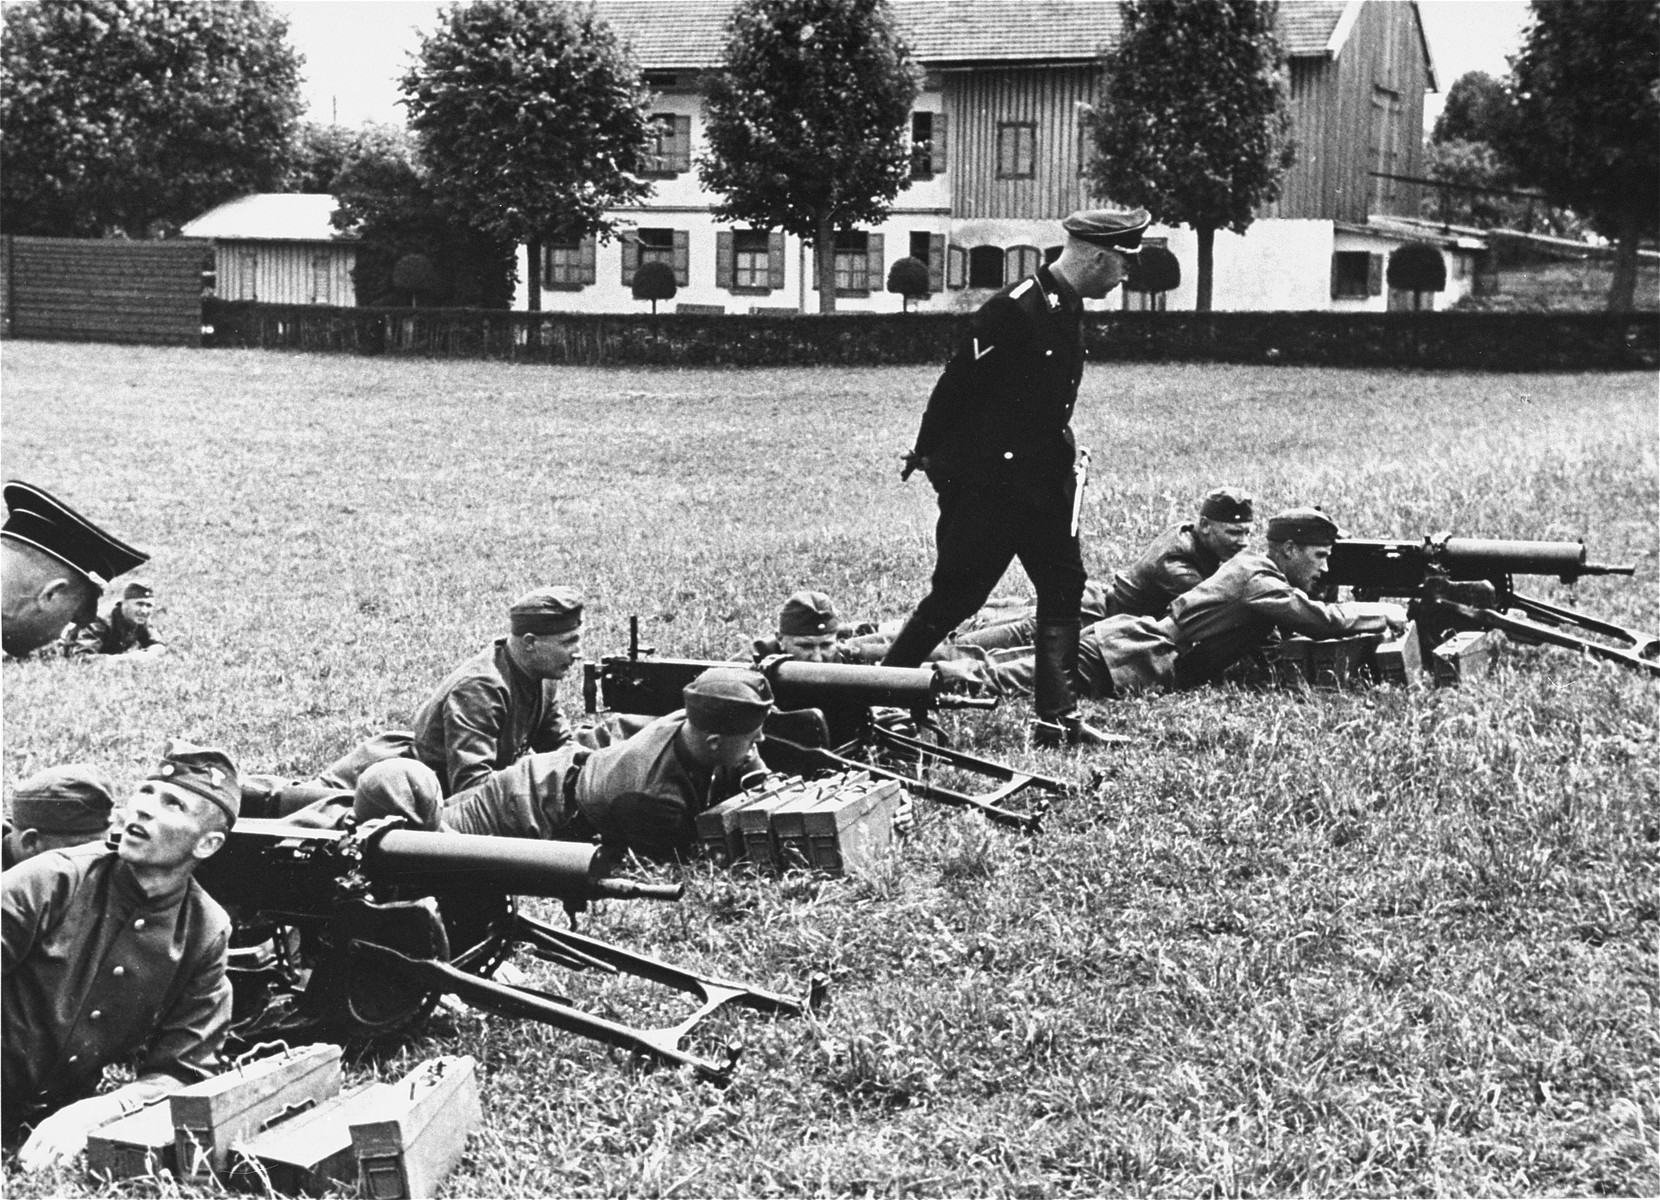 Heinrich Himmler inspects Waffen-SS troops.  This image is from an album of SS photographs.